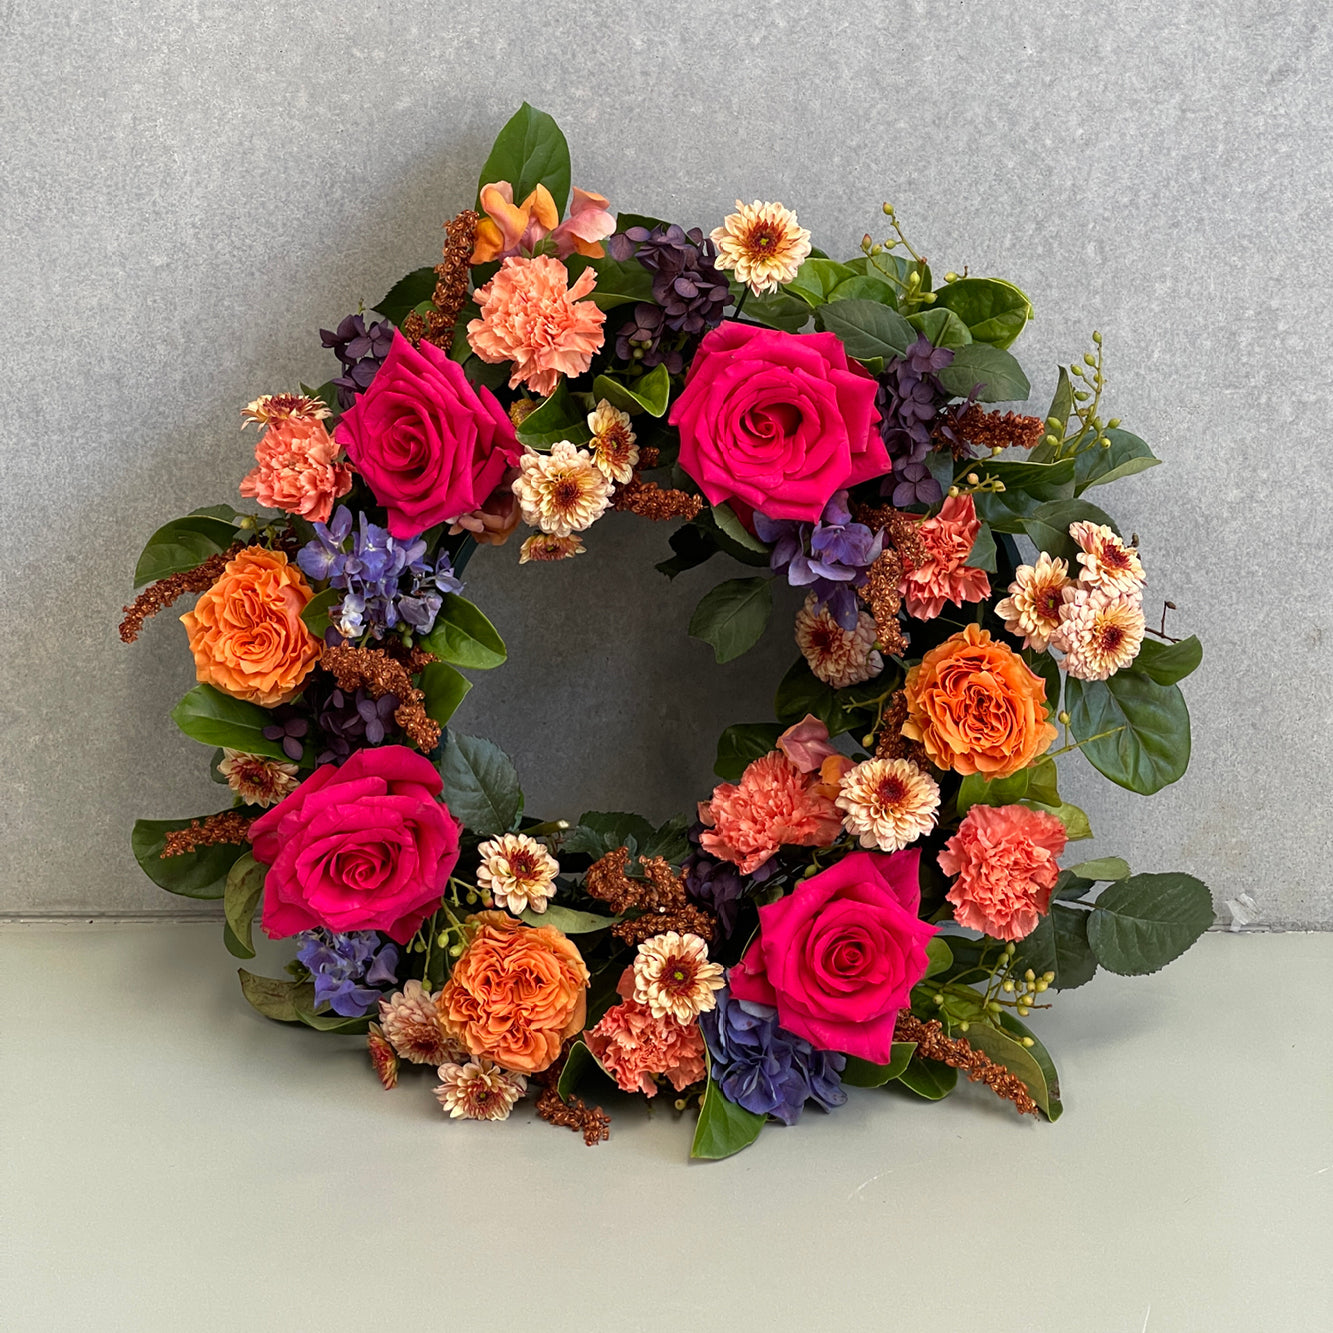 Honour your loved ones with funeral wreath. Trusted florist with a wide variety of gorgeous flower arrangements and same day delivery